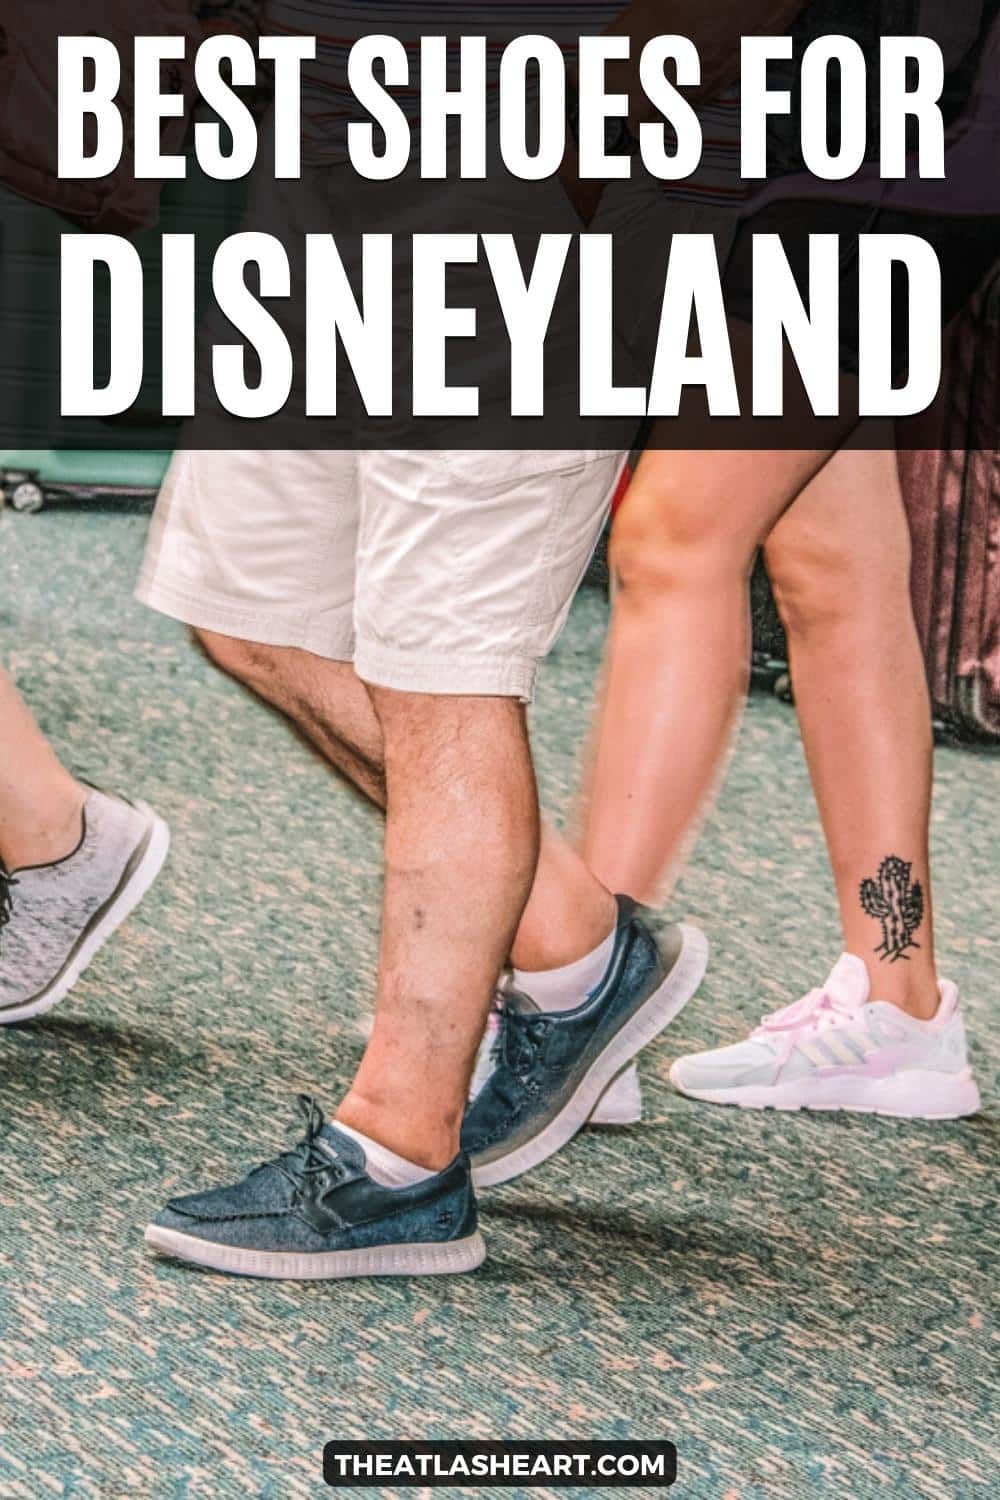 A lower view of a crowd of travelers' legs wearing walking shoes, with the text overlay, "Best Shoes for Disneyland."